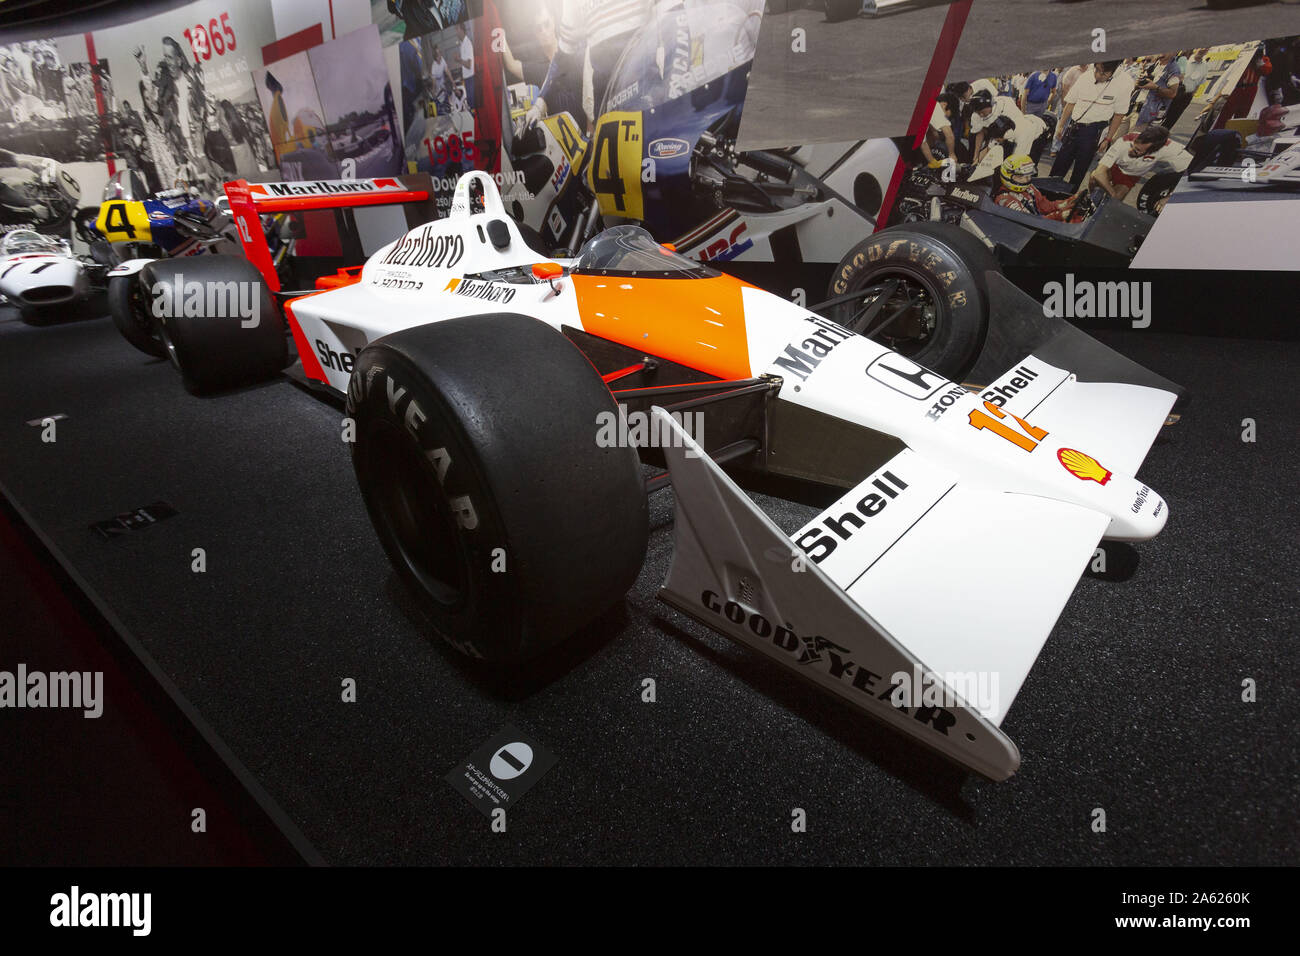 Tokyo, Japan. 23rd Oct, 2019. McLaren Honda MP4/4 on display during a press preview of the 46th Tokyo Motor Show 2019 in Tokyo Big Sight. Tokyo Motor Show 2019 showcases new mobility technologies from Japanese and overseas automakers. The exhibition is open to the public from October 25 to November 4. Credit: Rodrigo Reyes Marin/ZUMA Wire/Alamy Live News Stock Photo